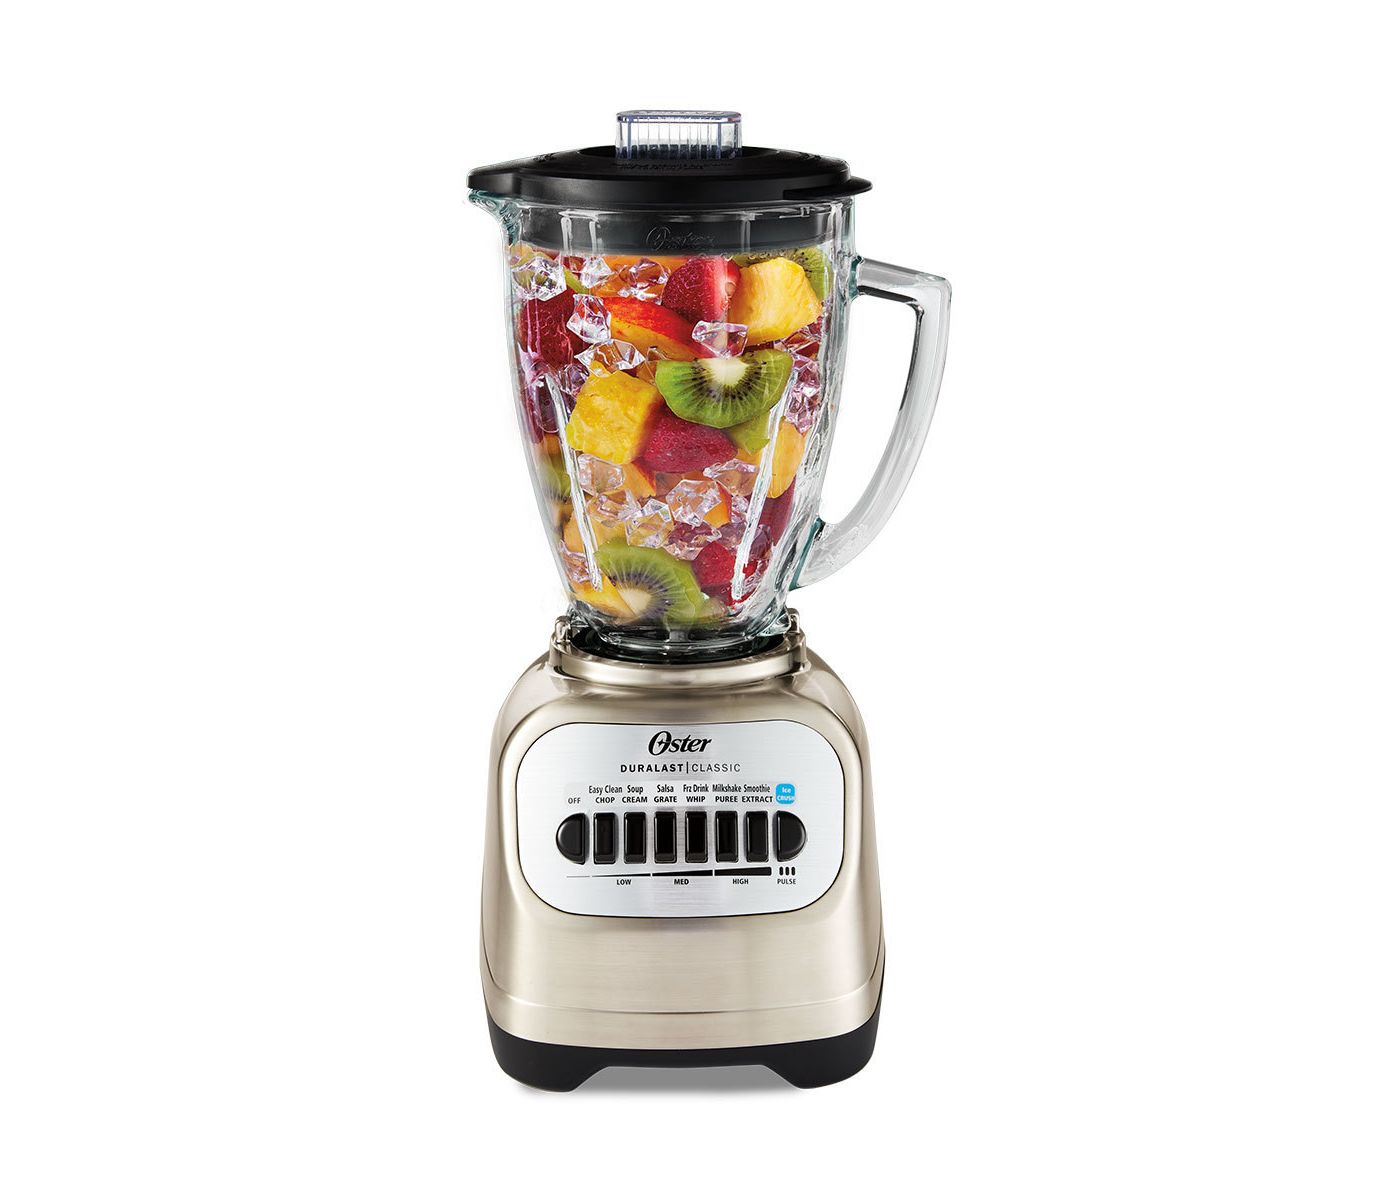 https://foodbythegram.com/wp-content/uploads/2021/01/Oster-Classic-Series-Blender-with-Travel-Smoothie-Cup.jpeg